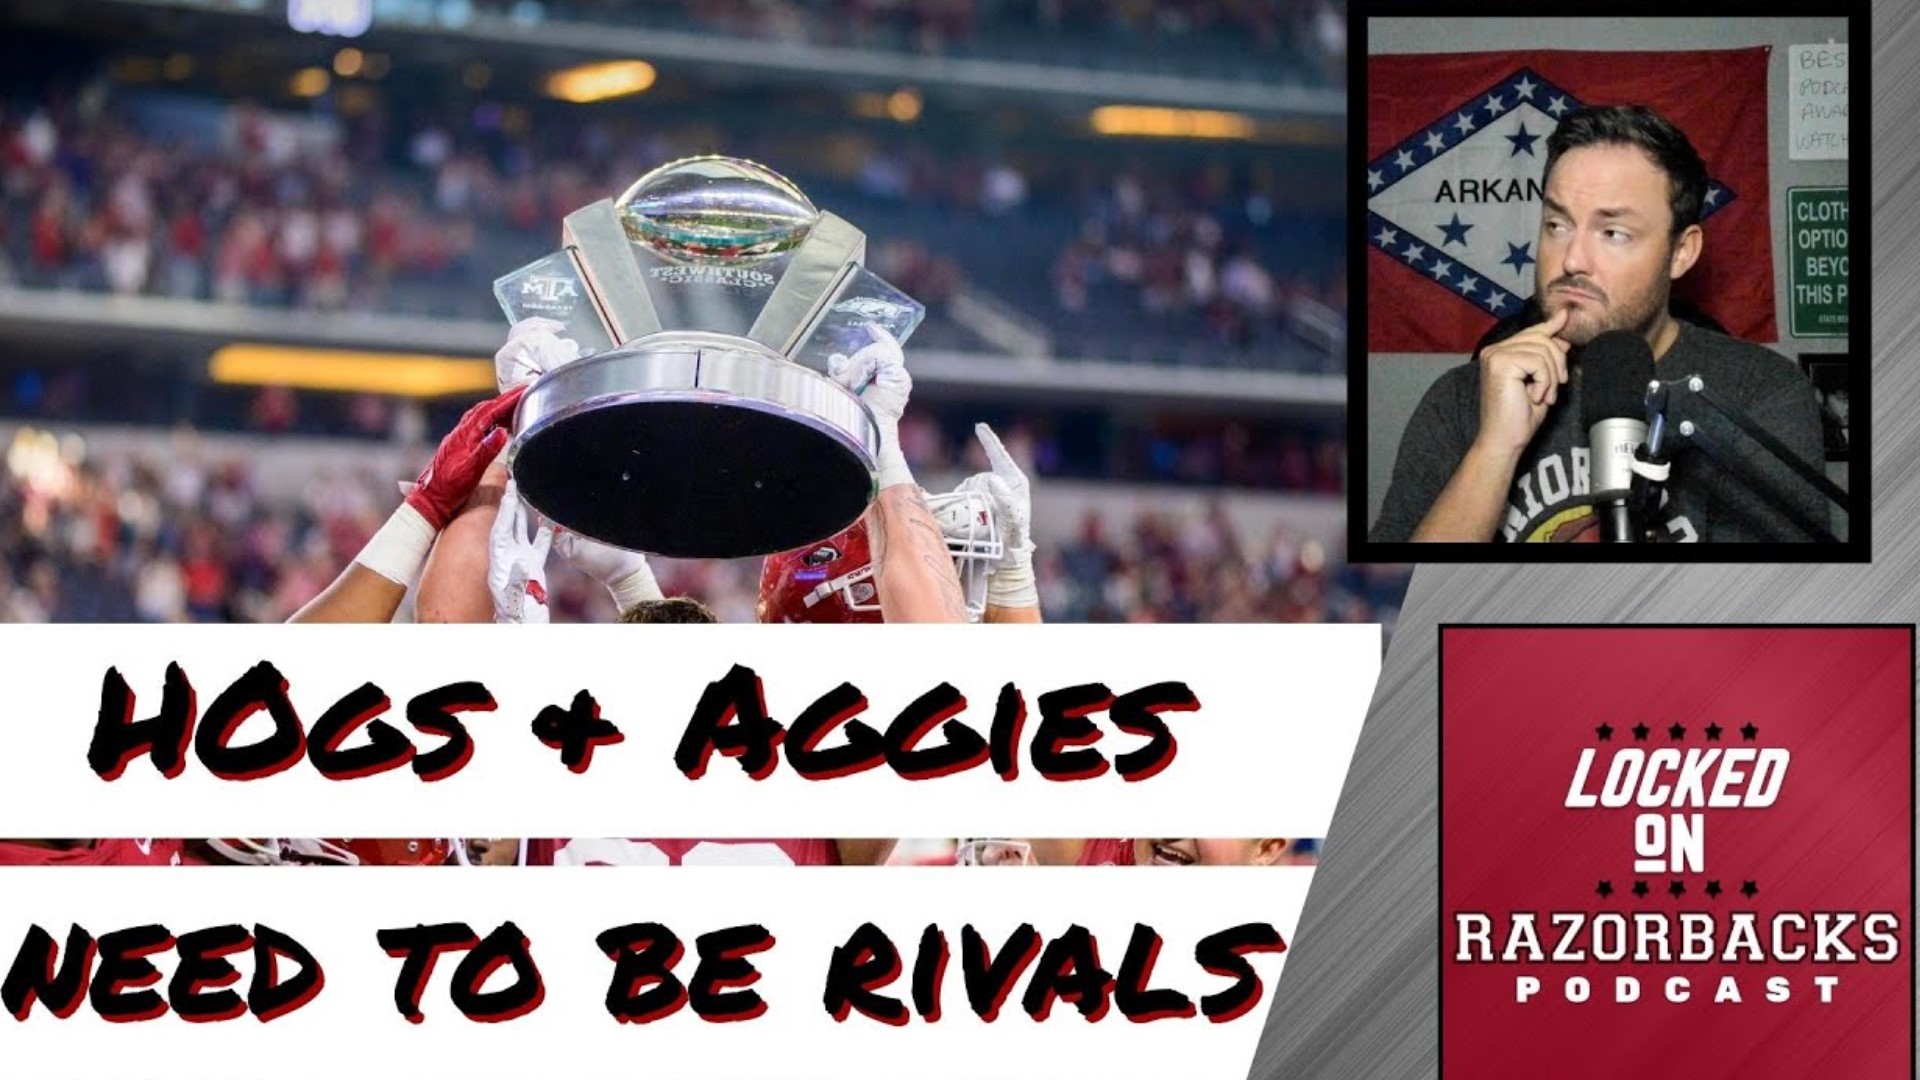 John Nabors discusses the reasons why he hates Texas A&M and why the SEC missed out on making the Aggies and Razorbacks true rivals.